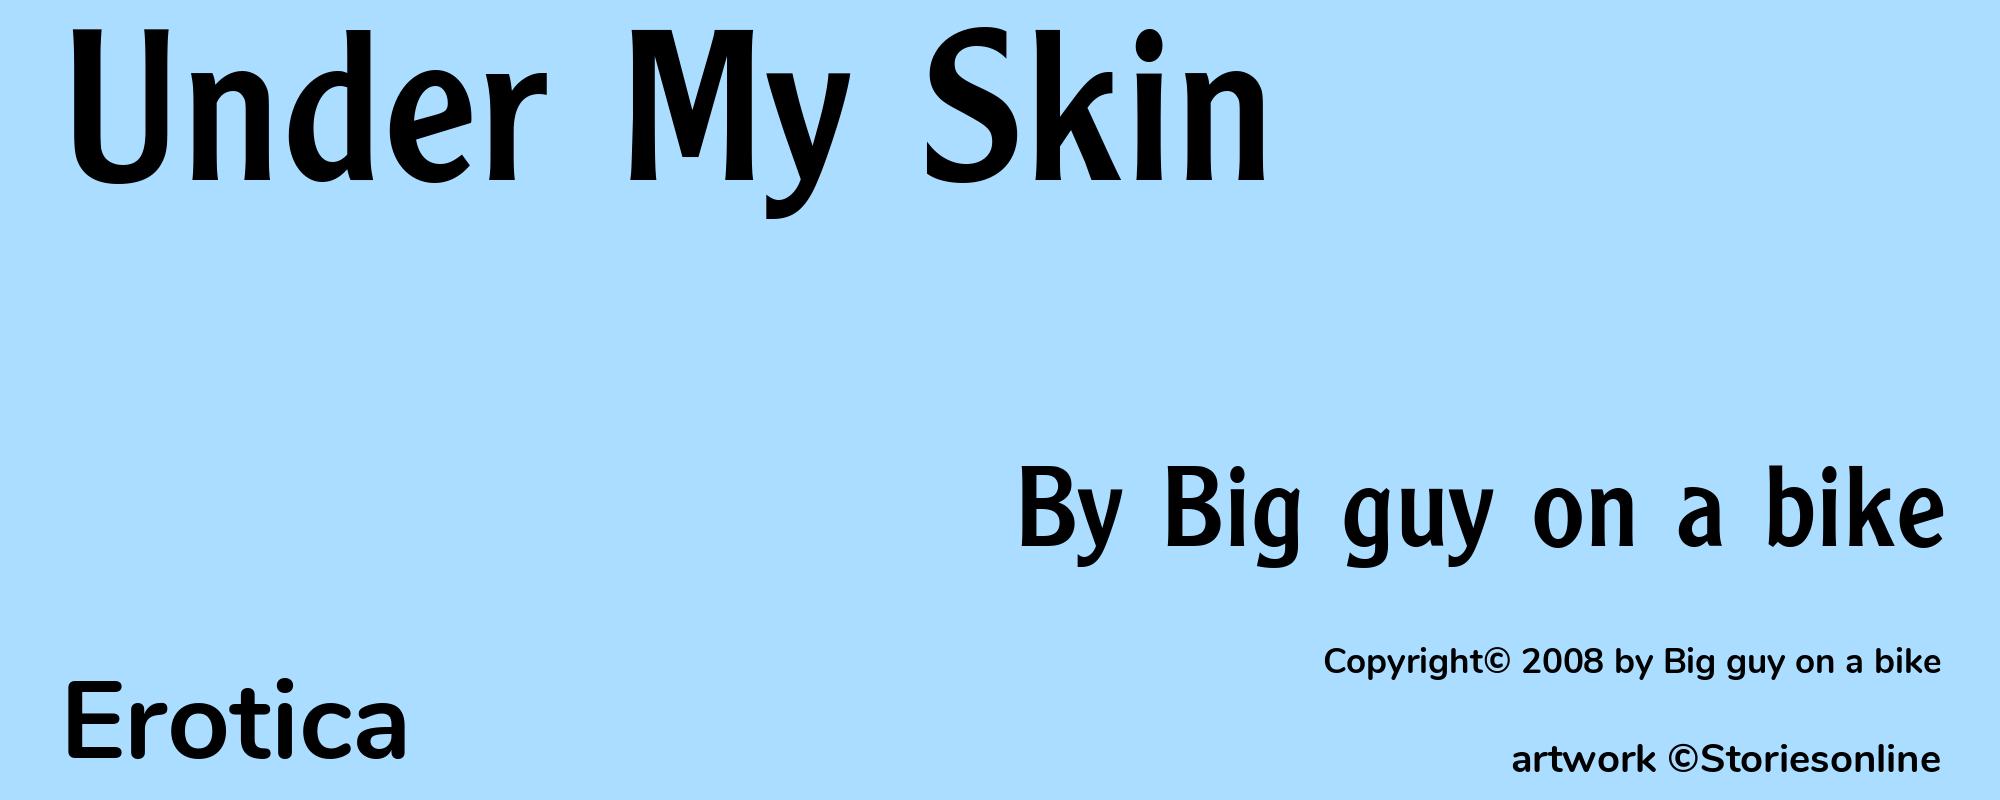 Under My Skin - Cover